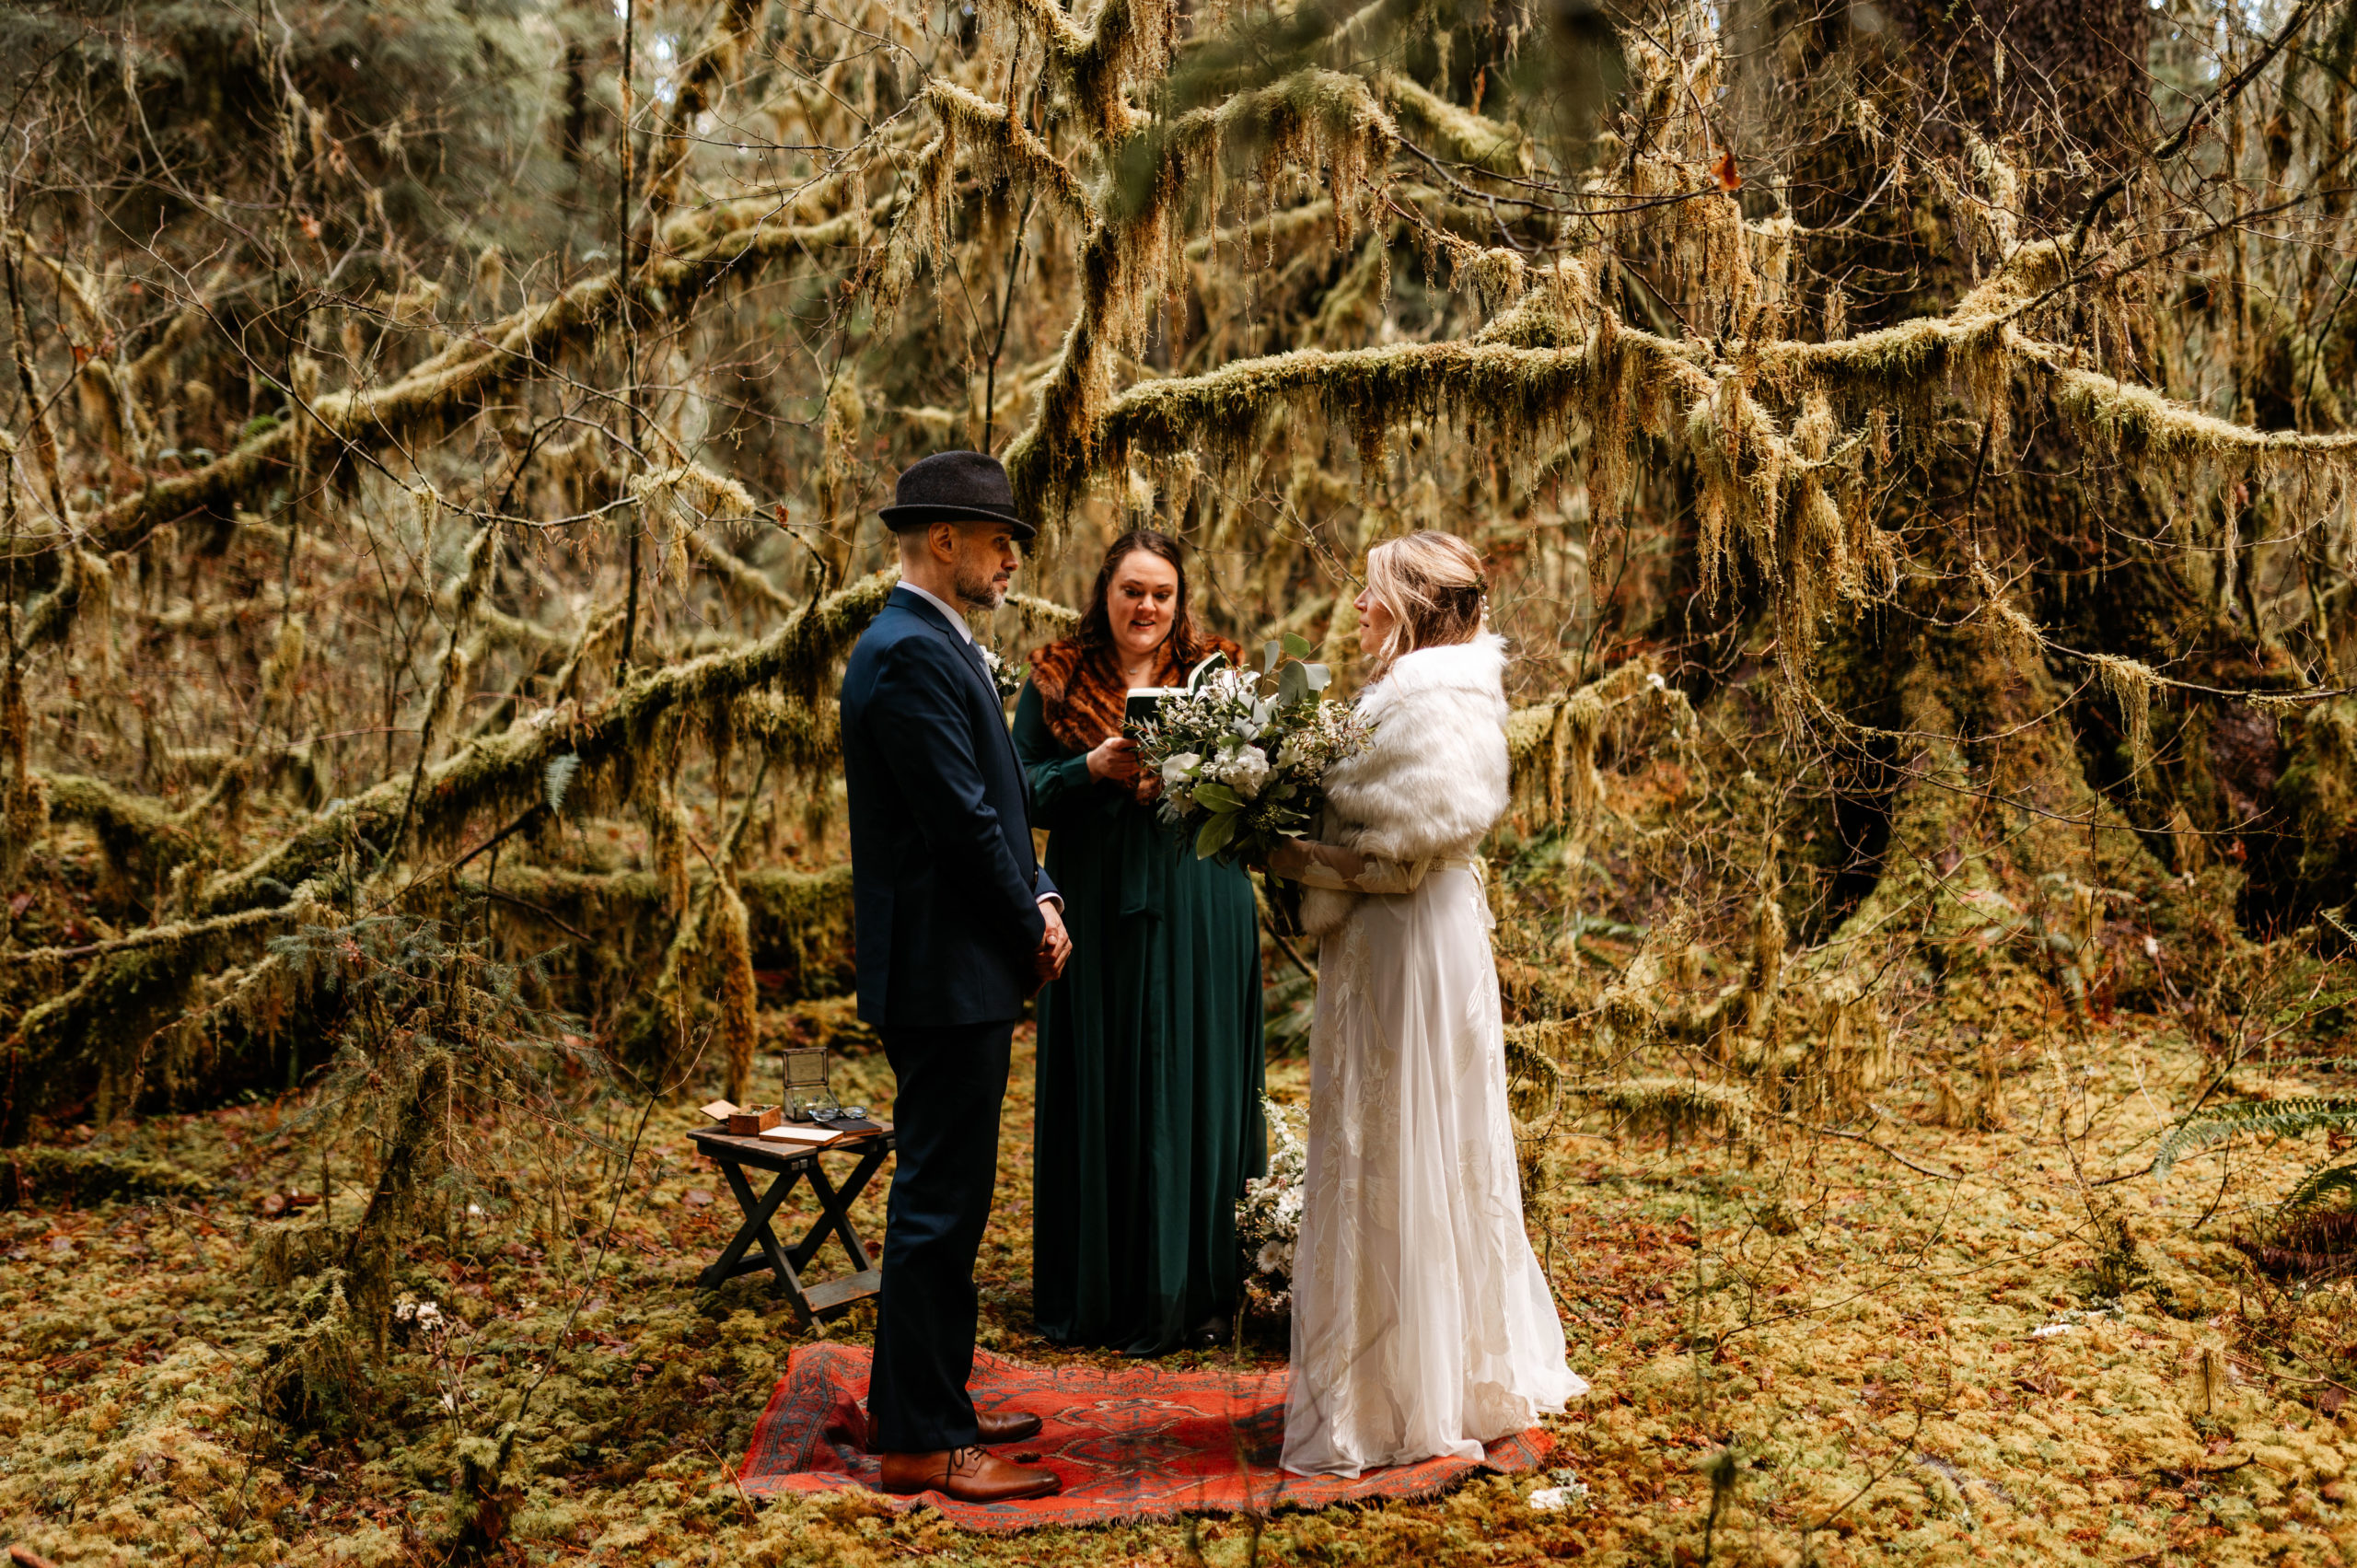 A bride and groom have a wedding ceremony in a mossy rainforest within Olympic National Park for their elopement wedding.